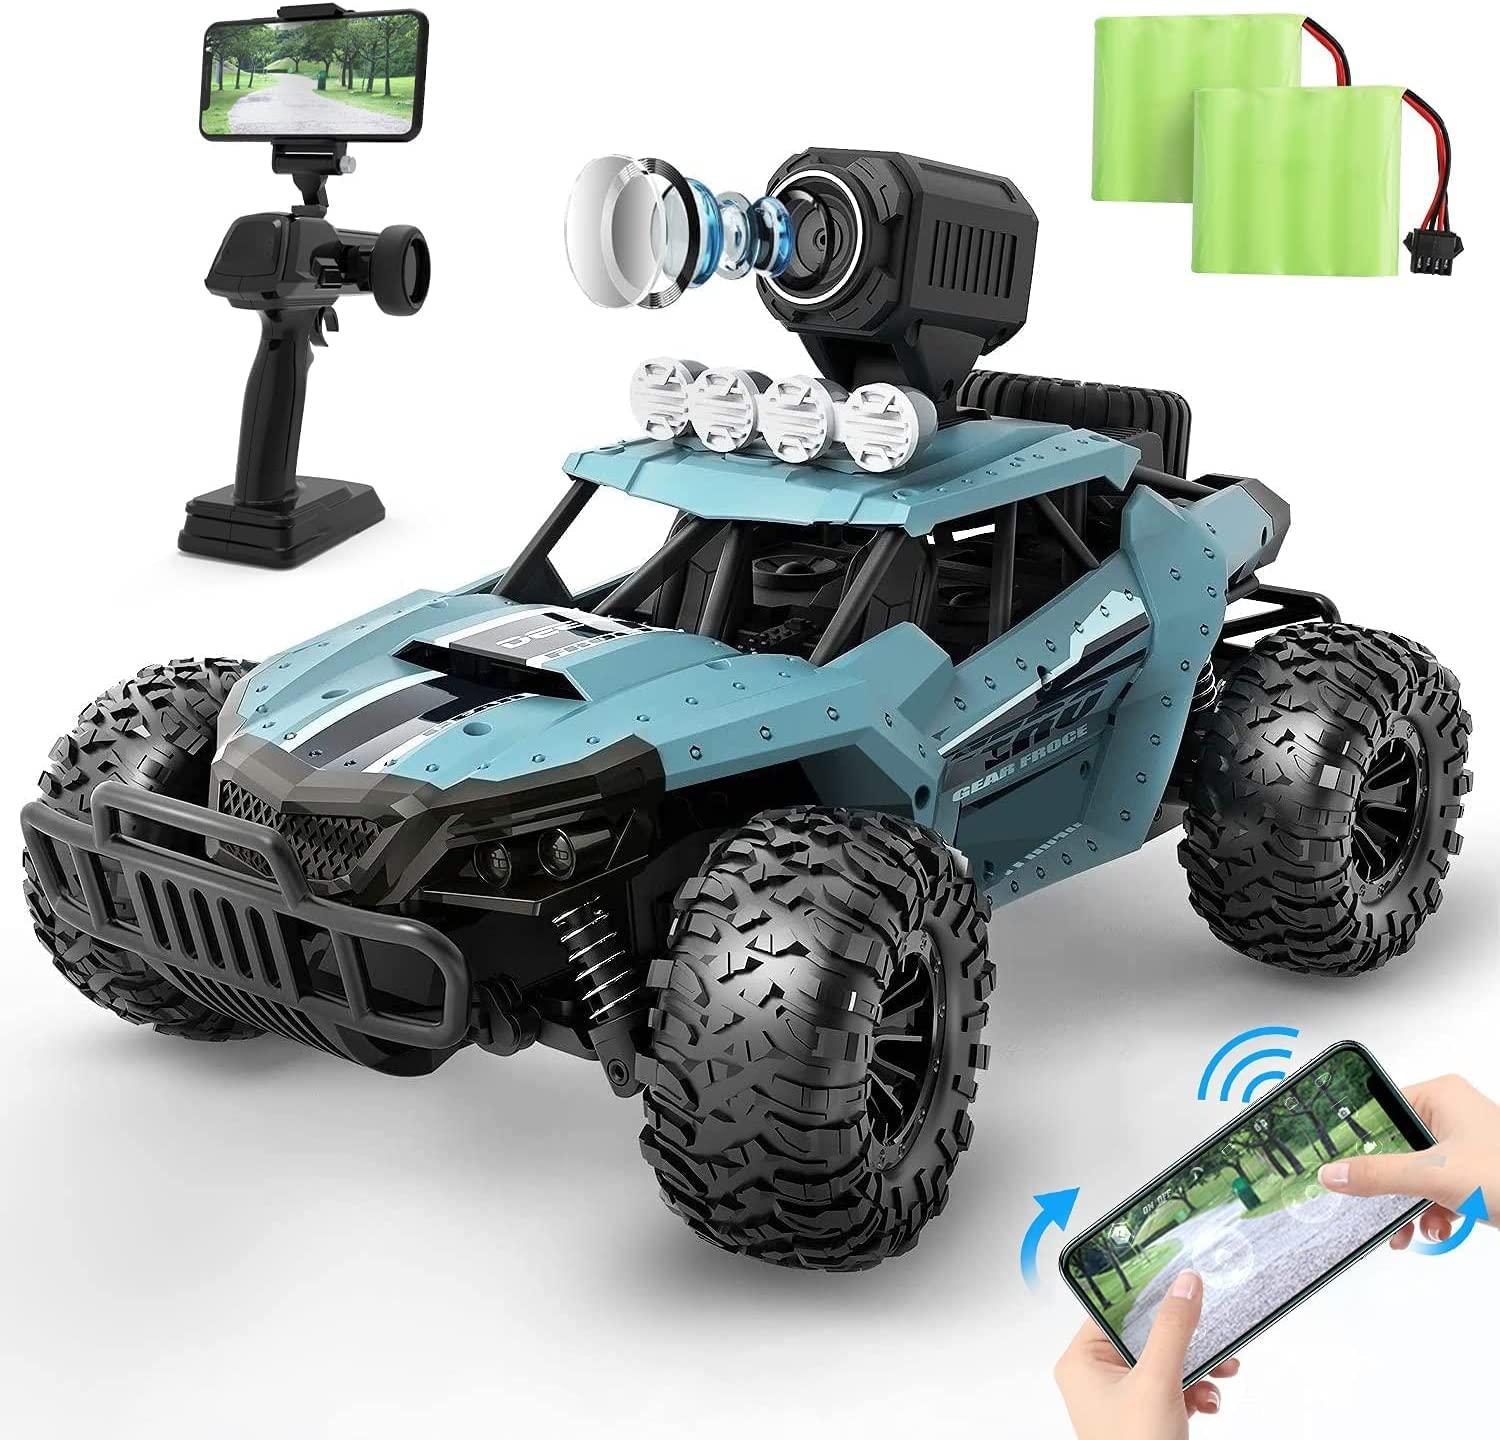 Electric Remote Control Cars For Adults: More power and precision for the ultimate RC car experience.